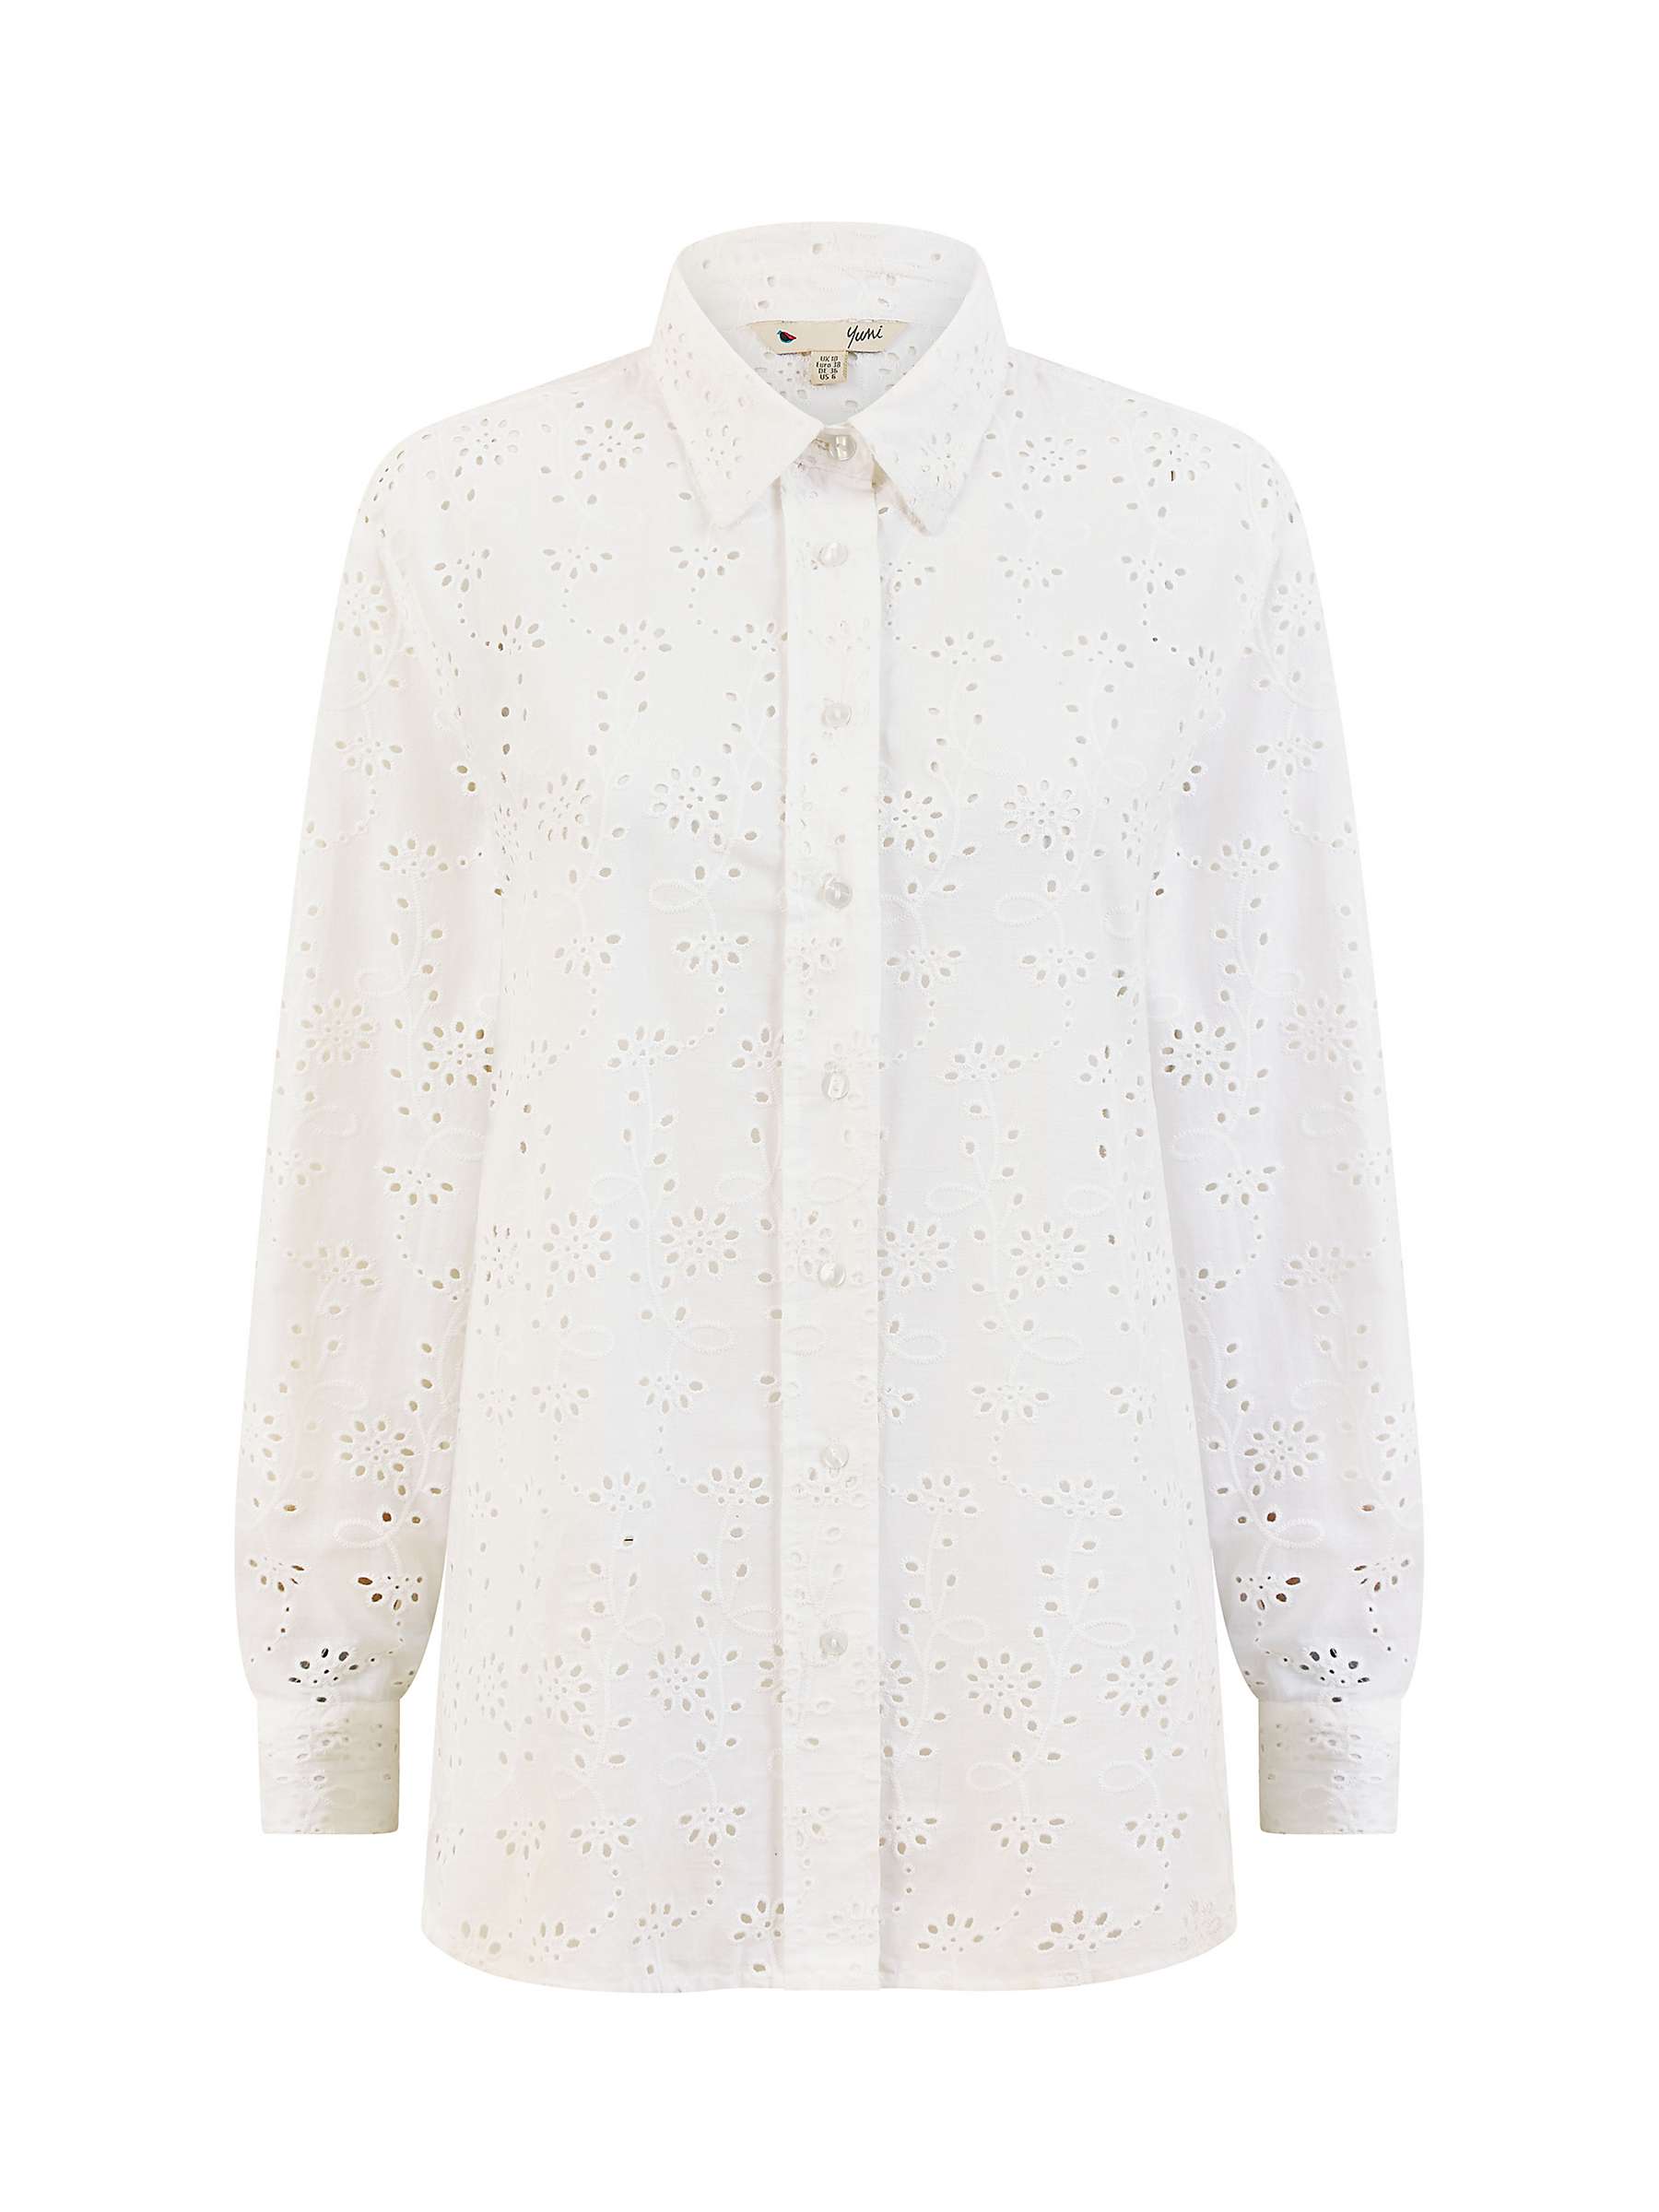 Buy Yumi Broderie Anglaise Relaxed Fit Shirt, White Online at johnlewis.com